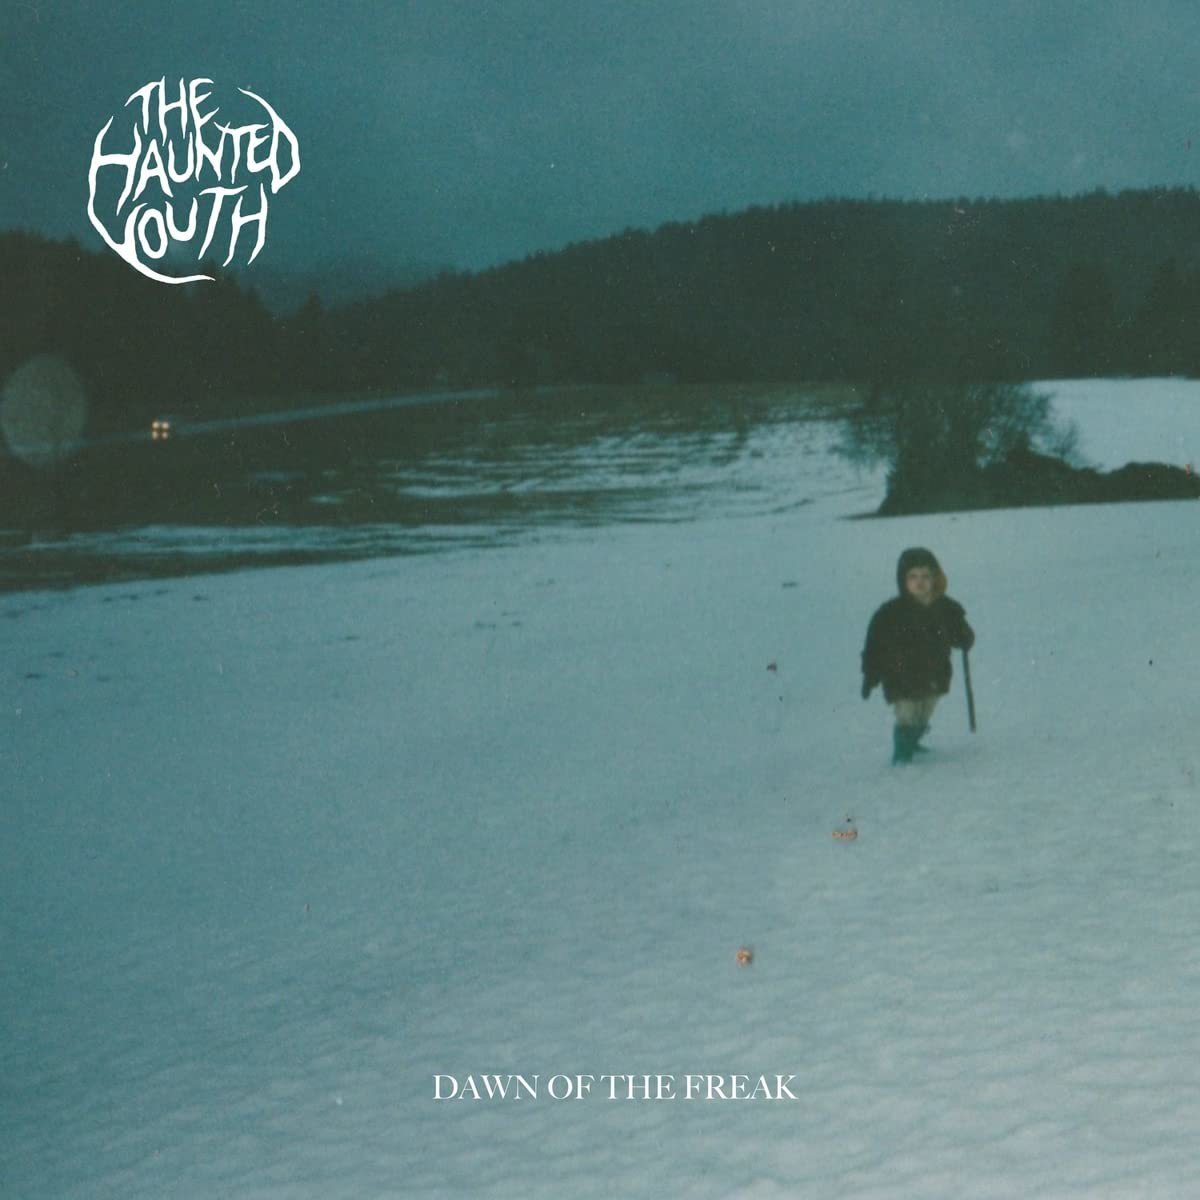 The Haunted Youth - Dawn Of The Freak (LP)